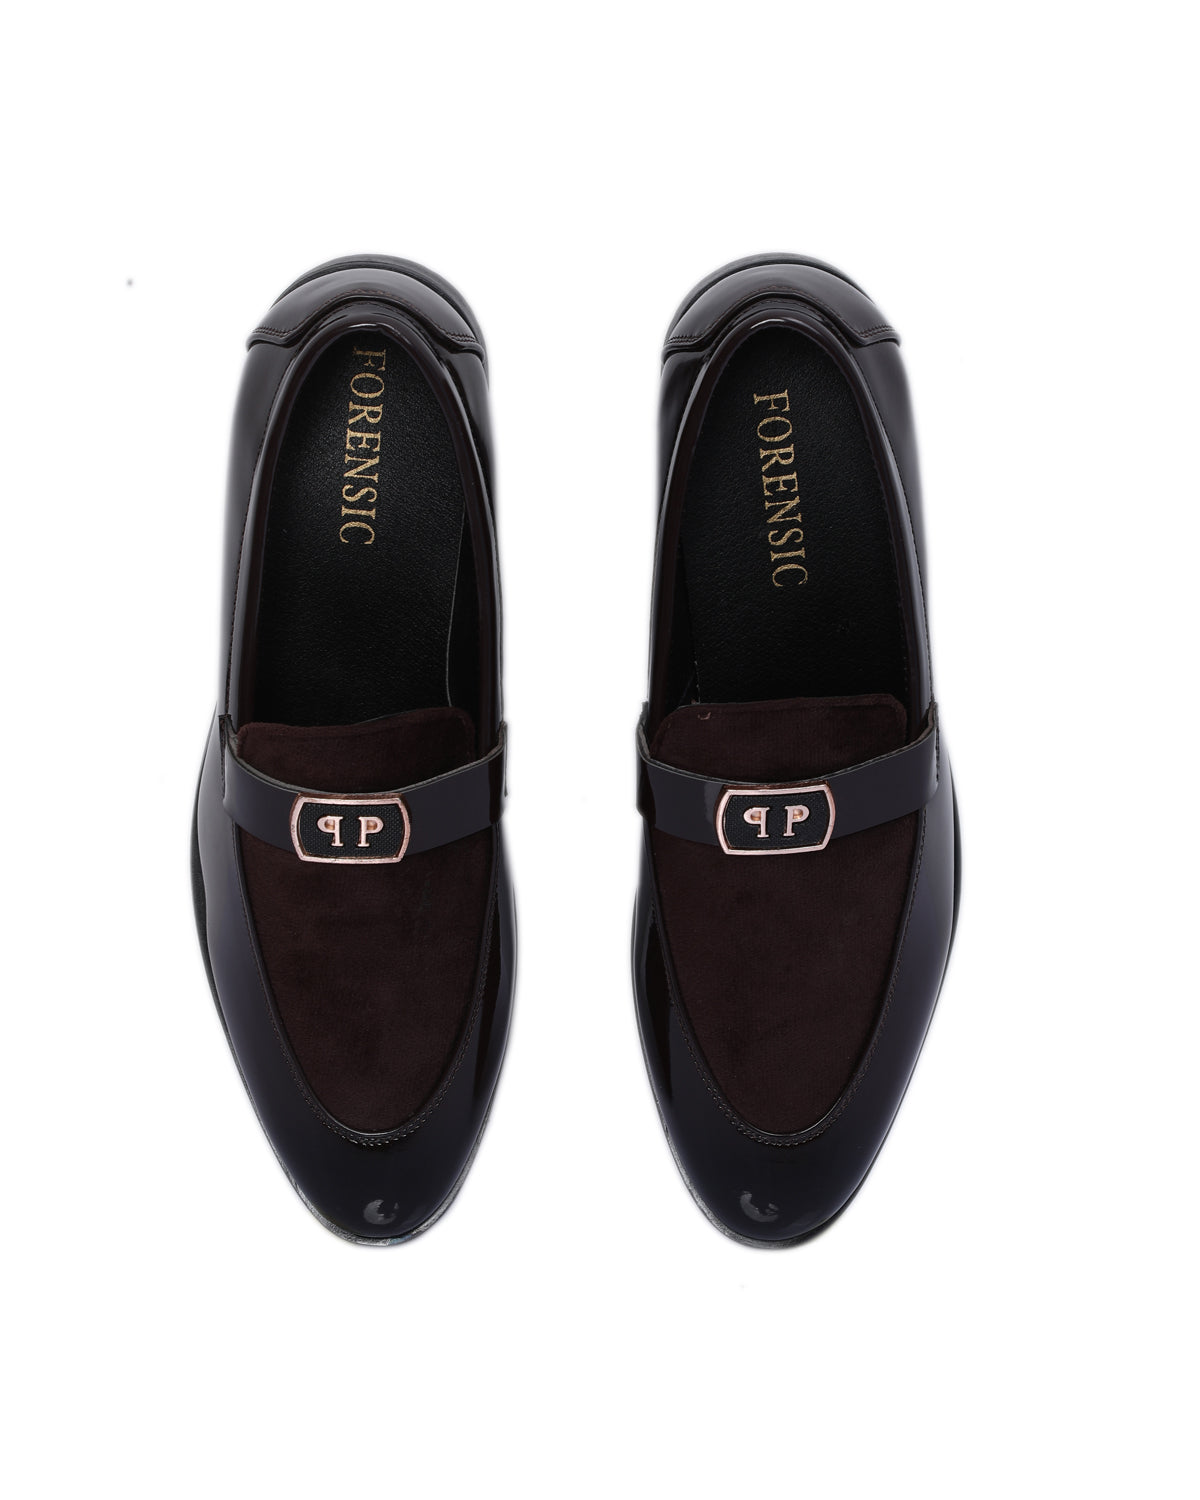 Moccasin Stylish Two-Tone Loafers - Black